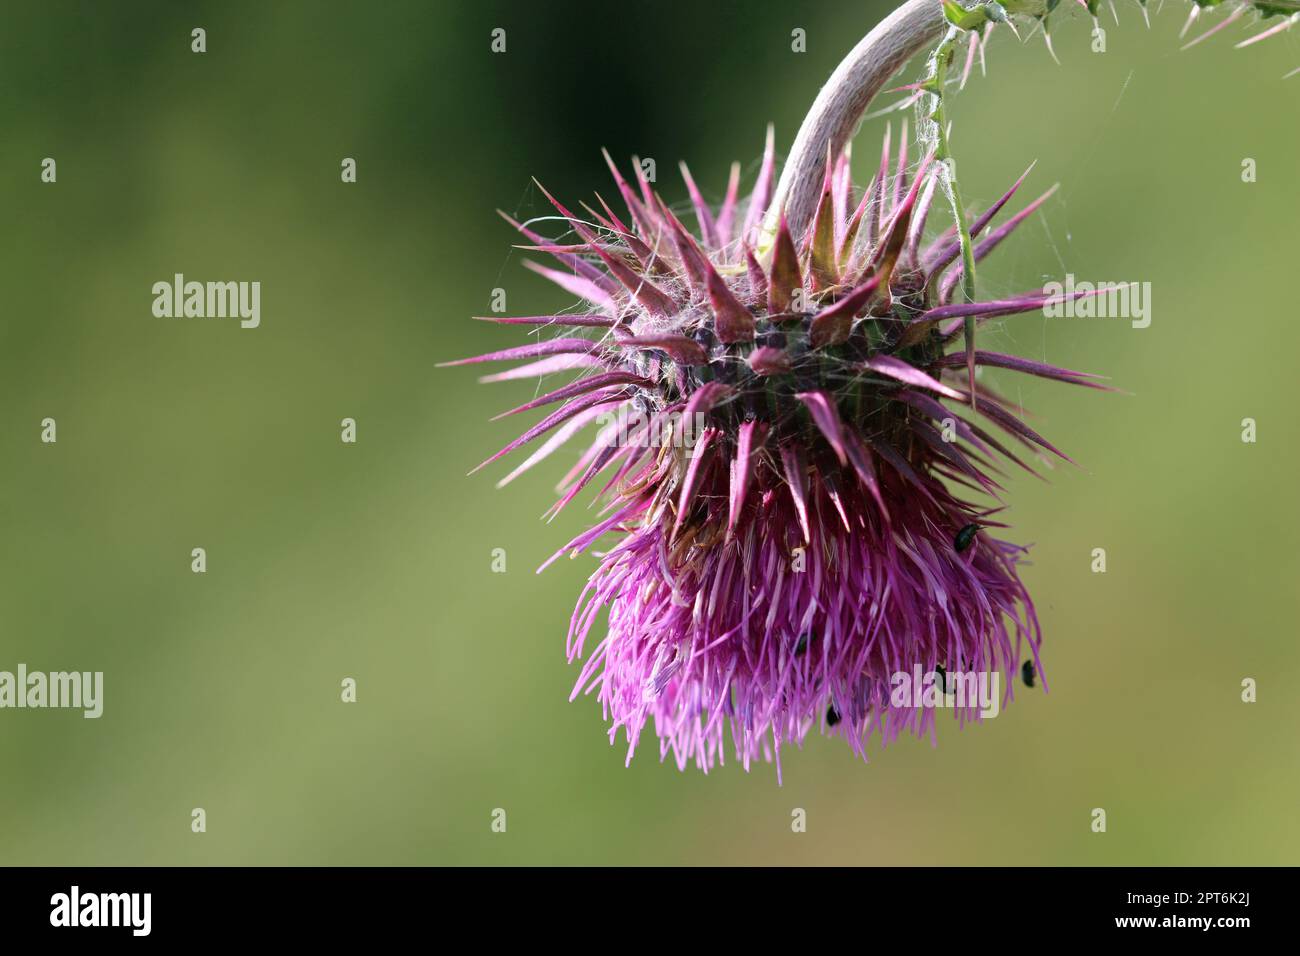 Purple musk thistle, Carduus nutans, flower in close up with a blurred background of leaves. Stock Photo